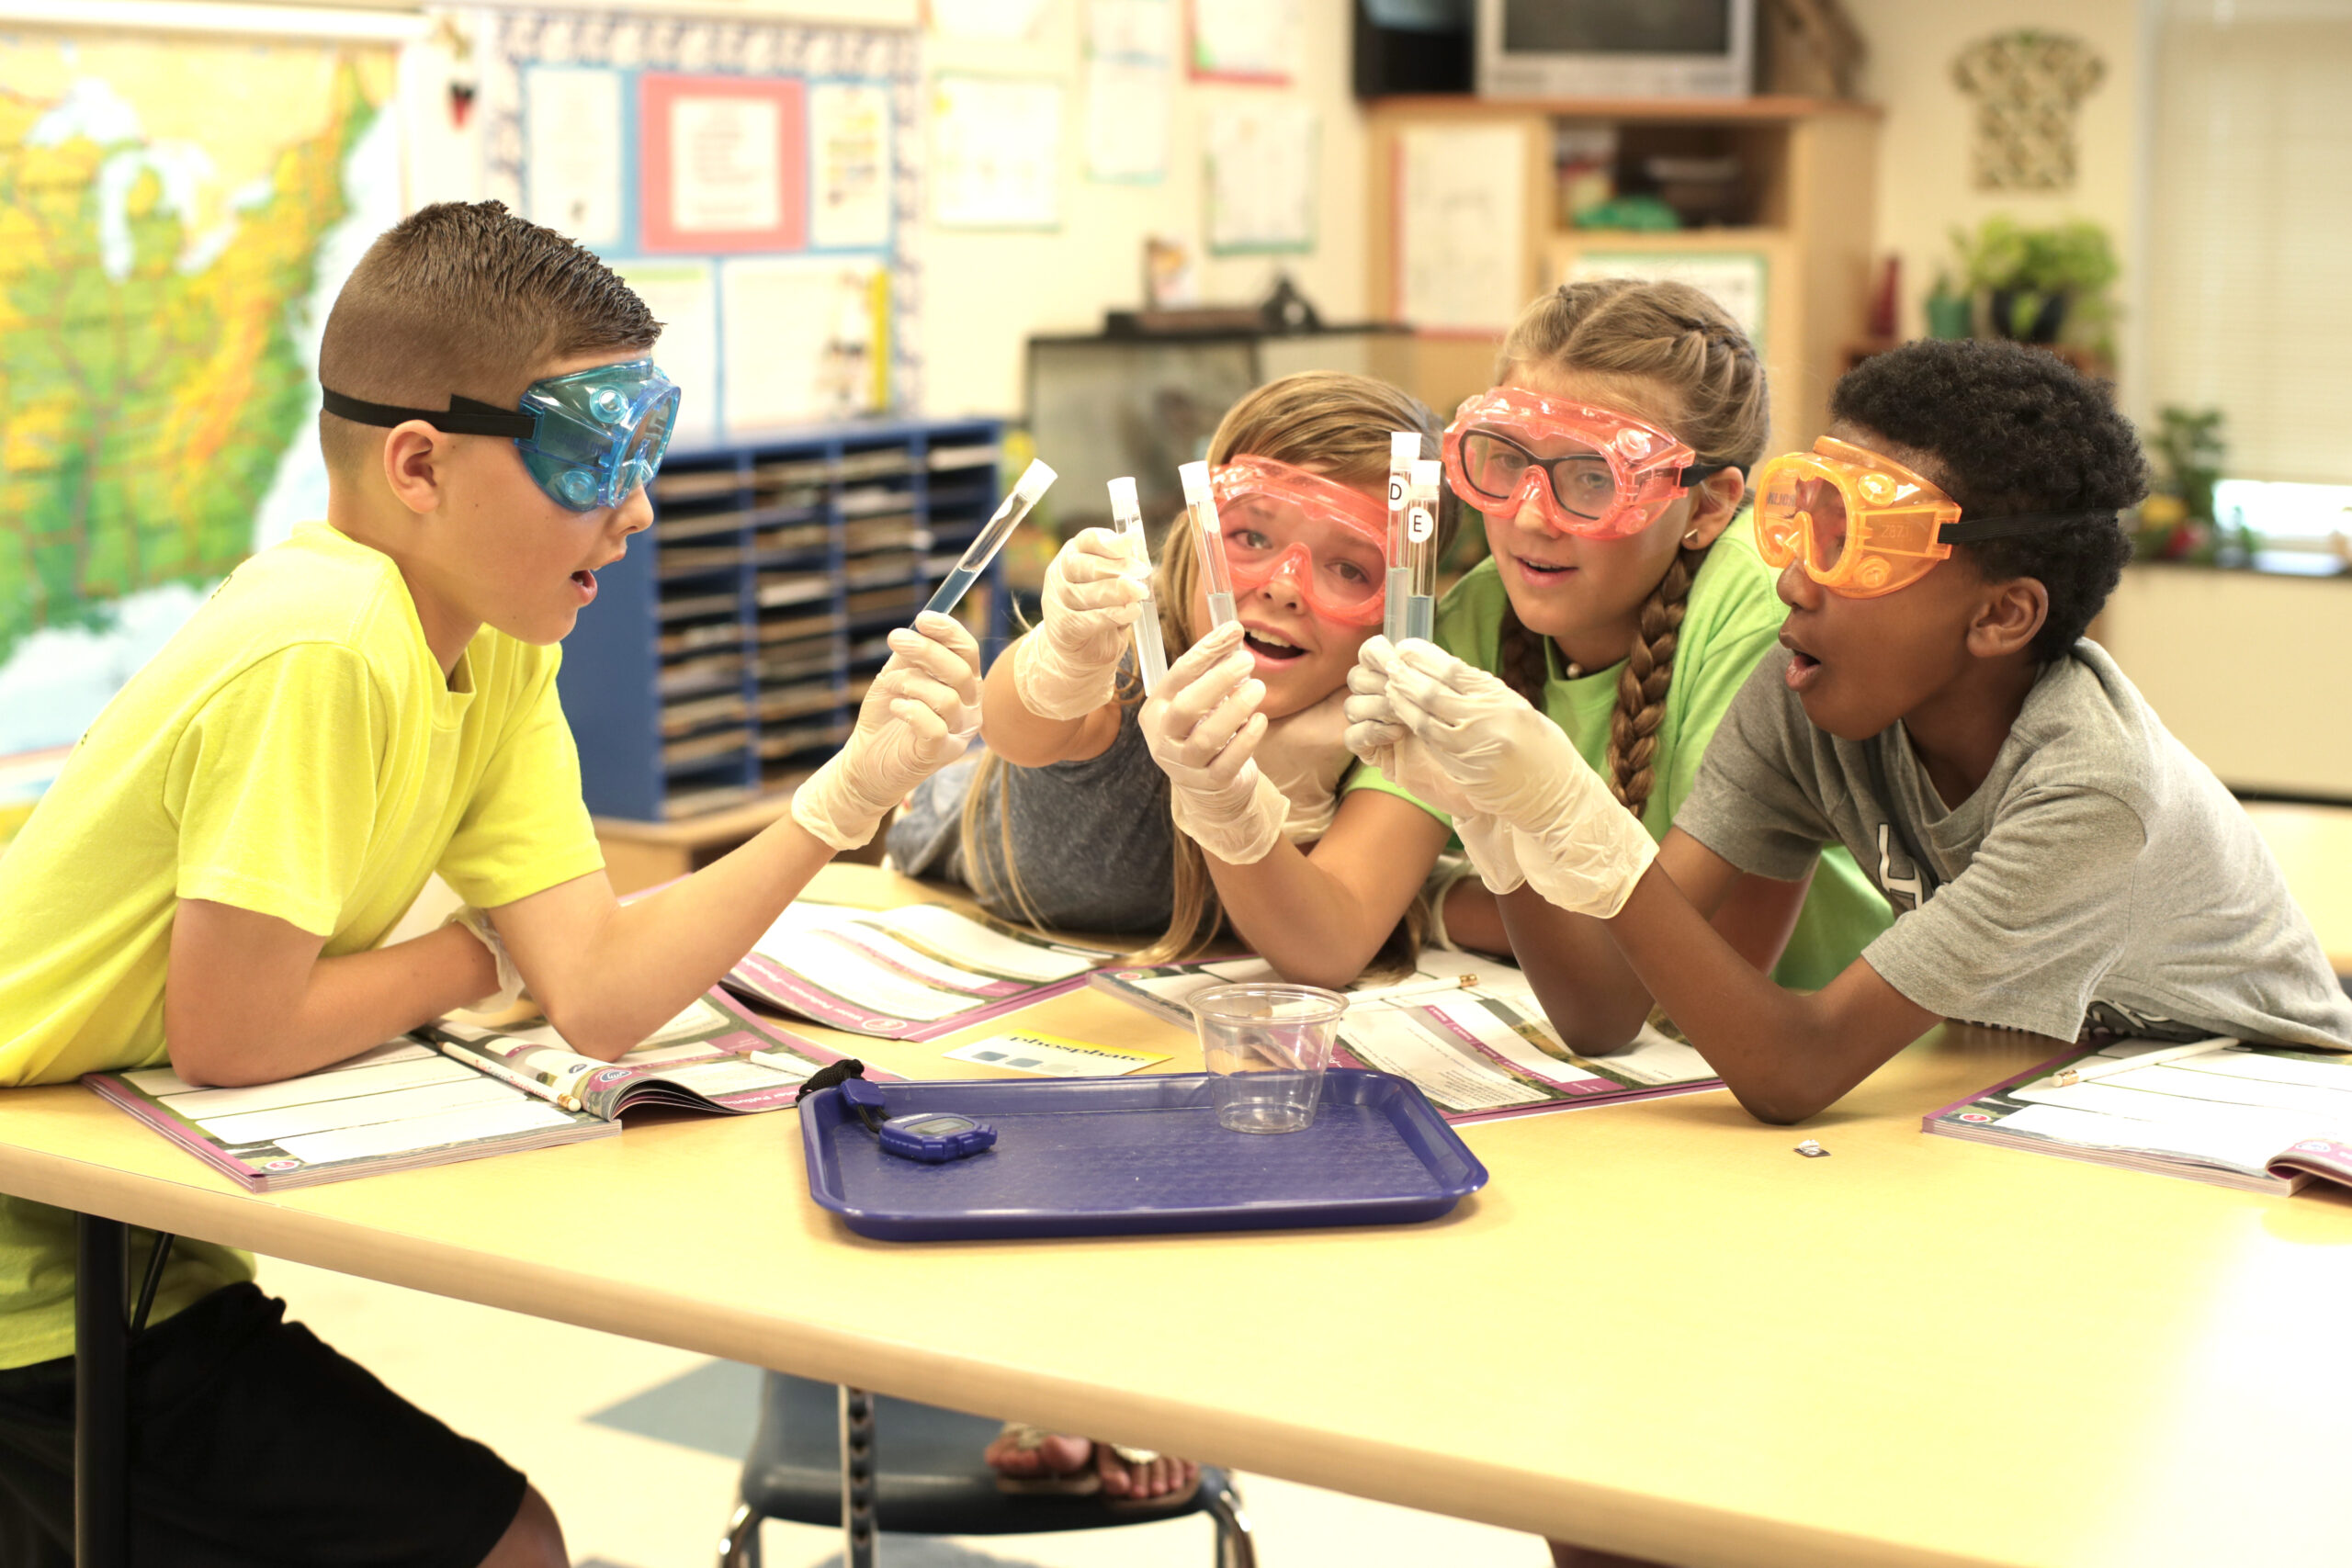 A group of students wearing safety gloves and goggles conducting a science experiment in the classroom